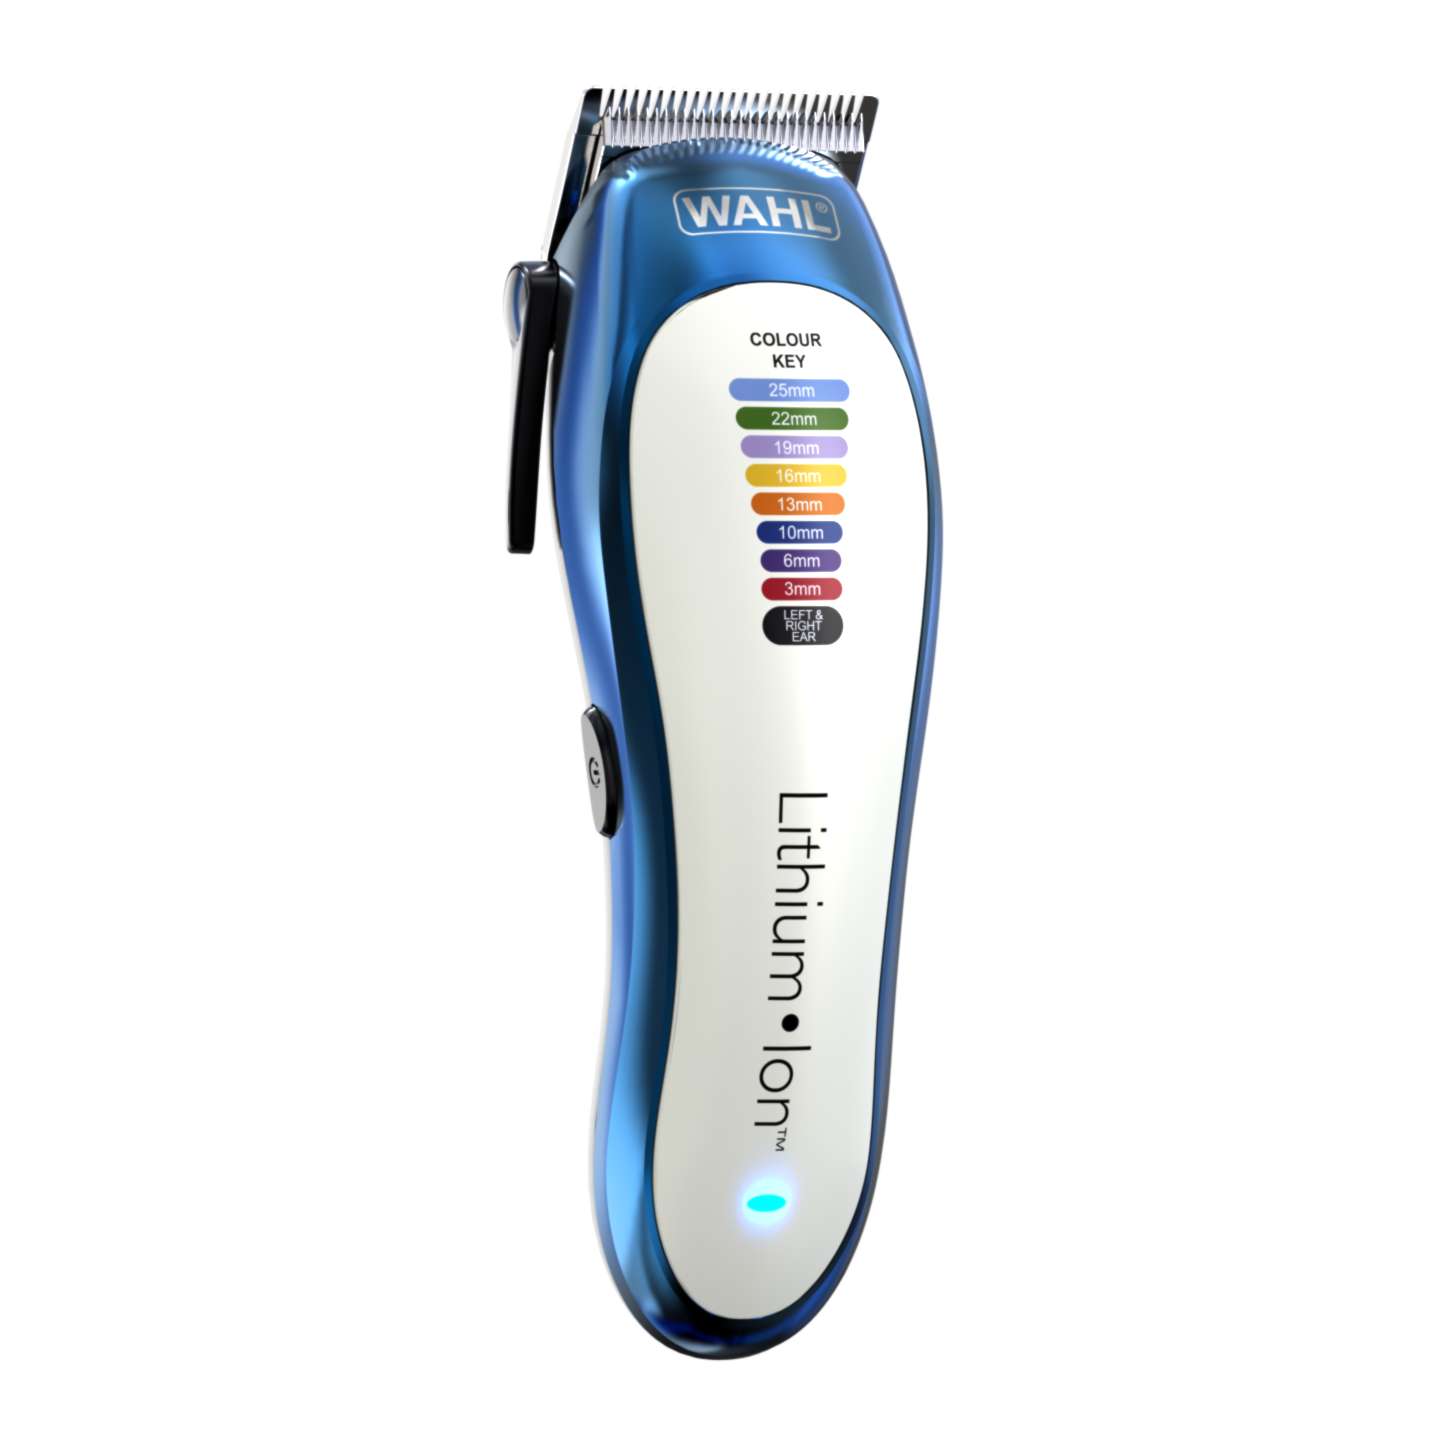 Colour Pro Lithium | Home Haircutting | Male Grooming | Wahl UK